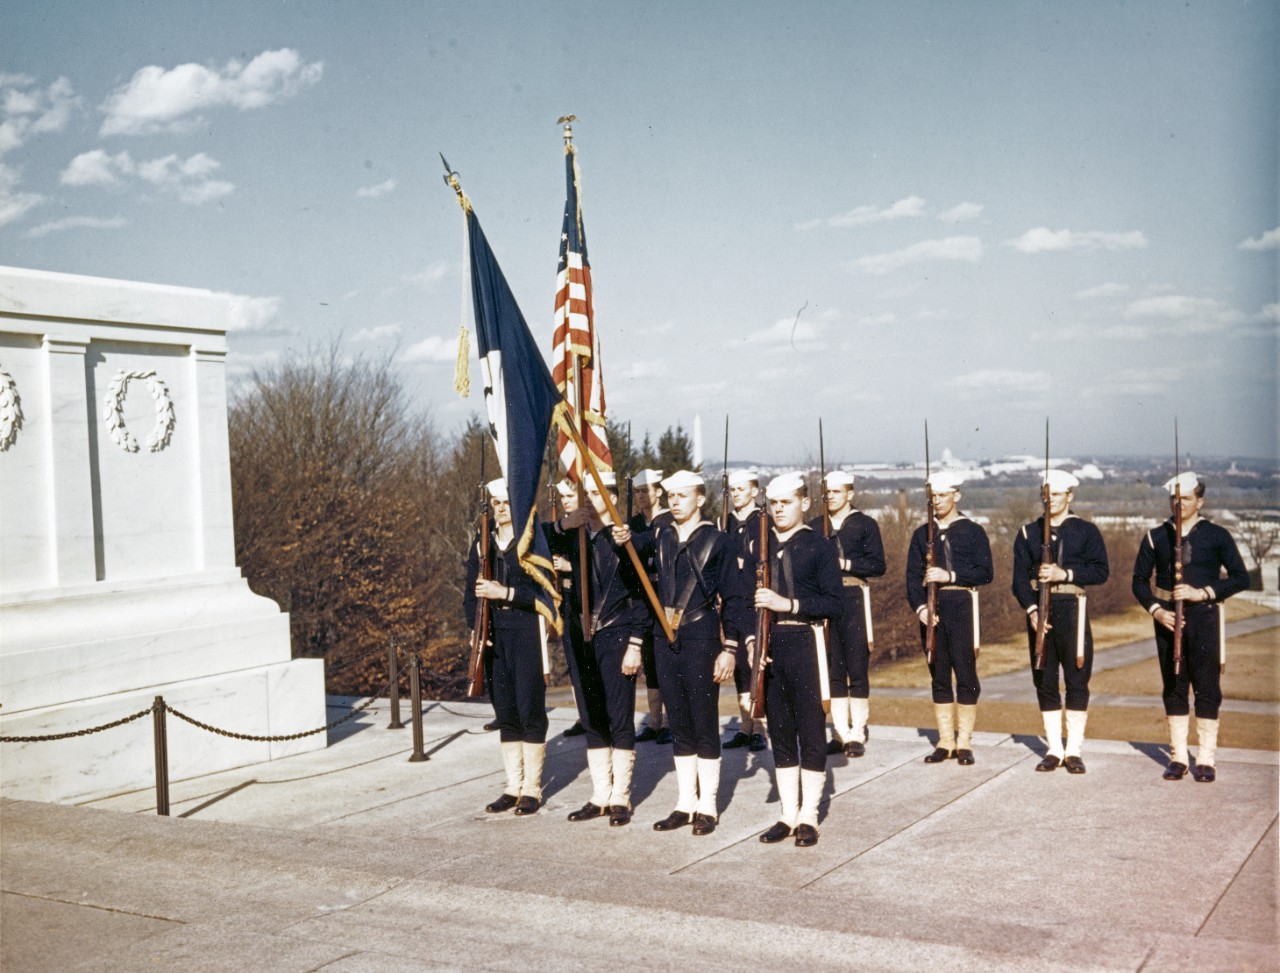 Navy Honor Guard stands at "present arms" beside the Tomb of the Unknown Soldier, during World War II. Washington, D.C. can be seen in the distance, with the Washington Monument in the center and the Capitol farther to the right. Photographed prior to April 1944.